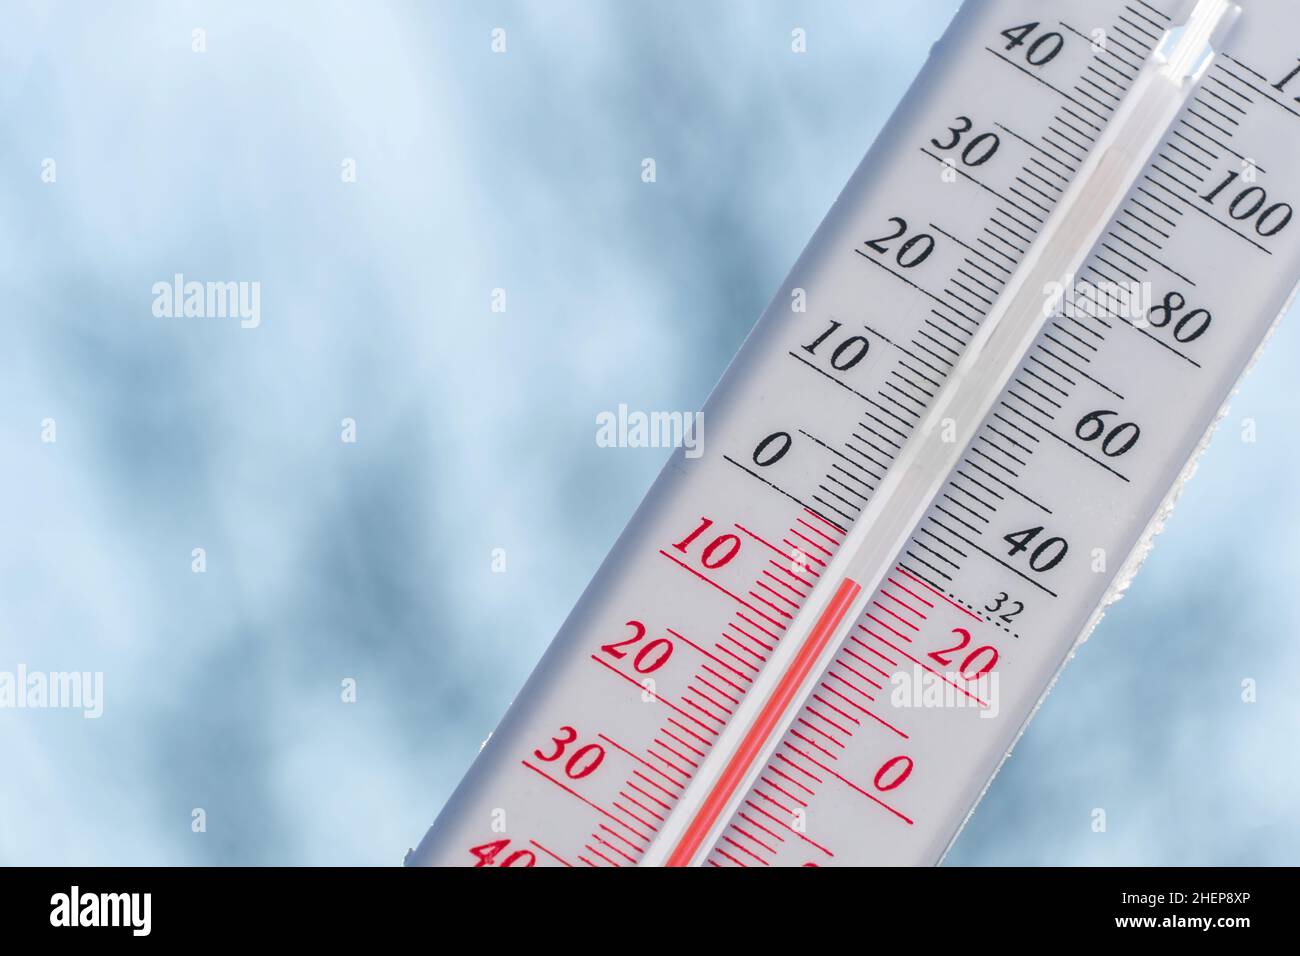 https://c8.alamy.com/comp/2HEP8XP/thermometer-in-winter-in-the-cold-on-snow-and-analyzes-low-negative-air-temperatures-in-clear-sunny-weathermeteorological-conditions-and-environmenta-2HEP8XP.jpg